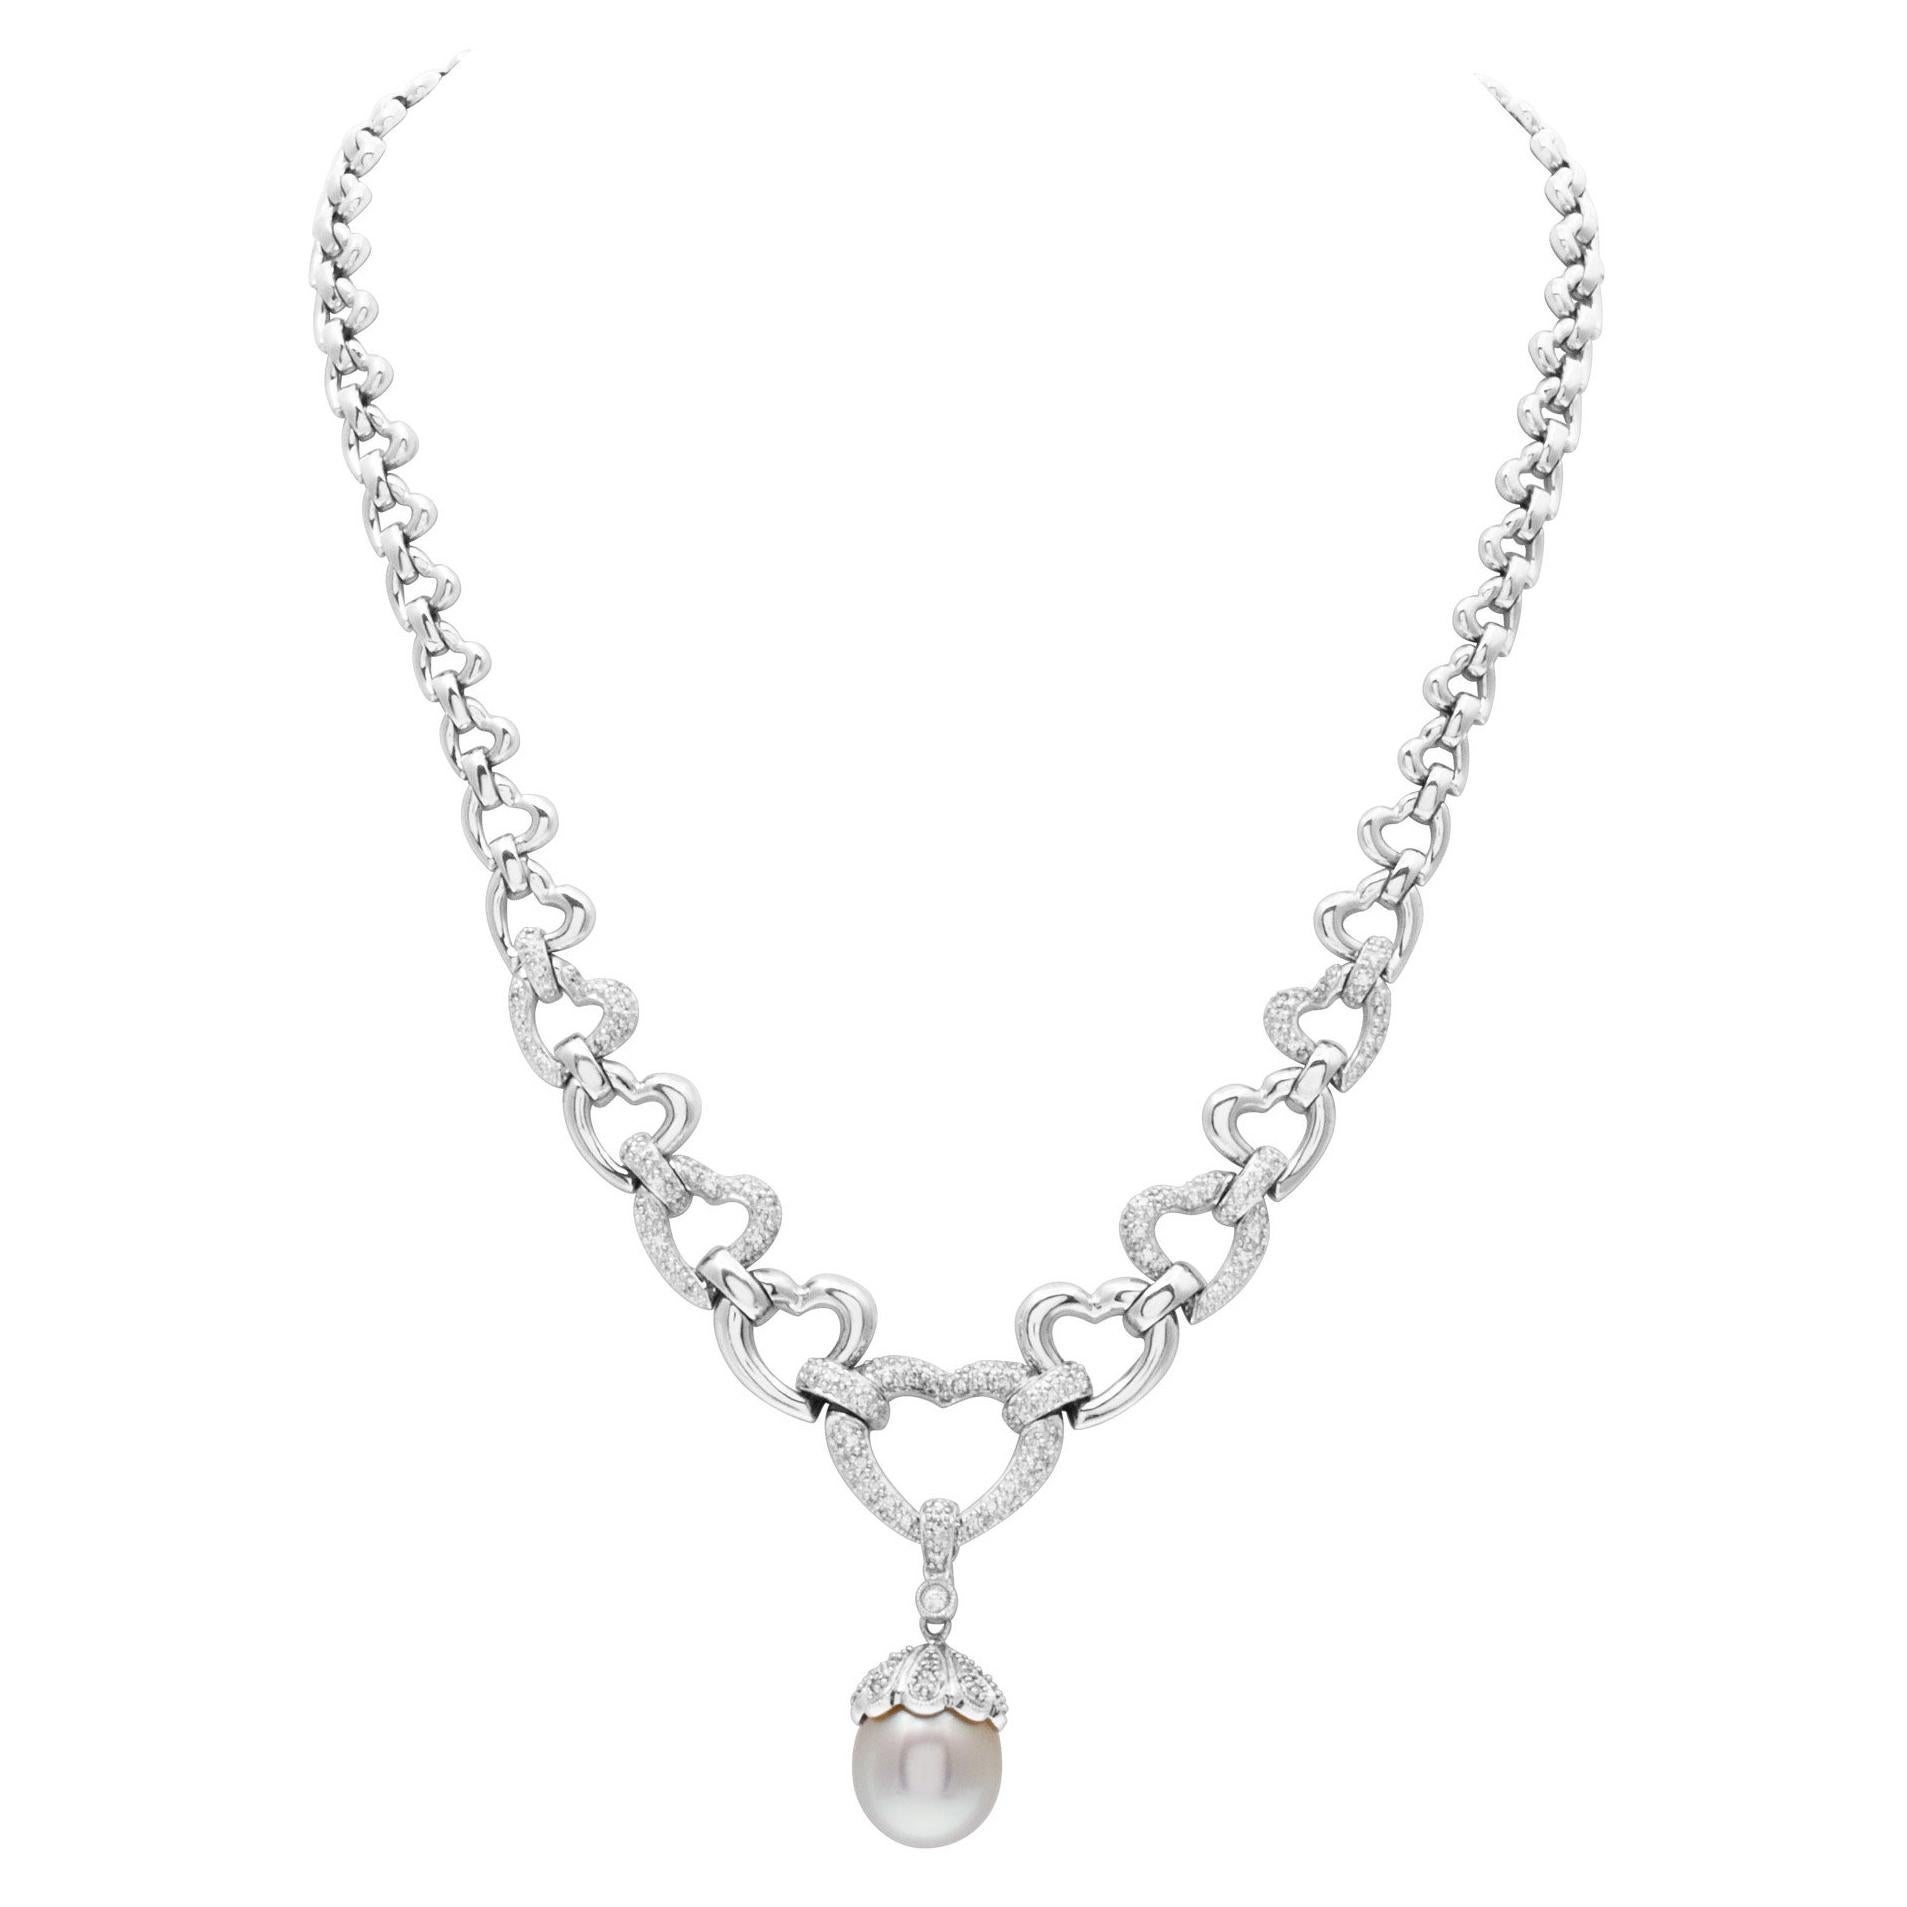 Elegant Necklace in 14k White Gold with Diamond Accents and Pearl